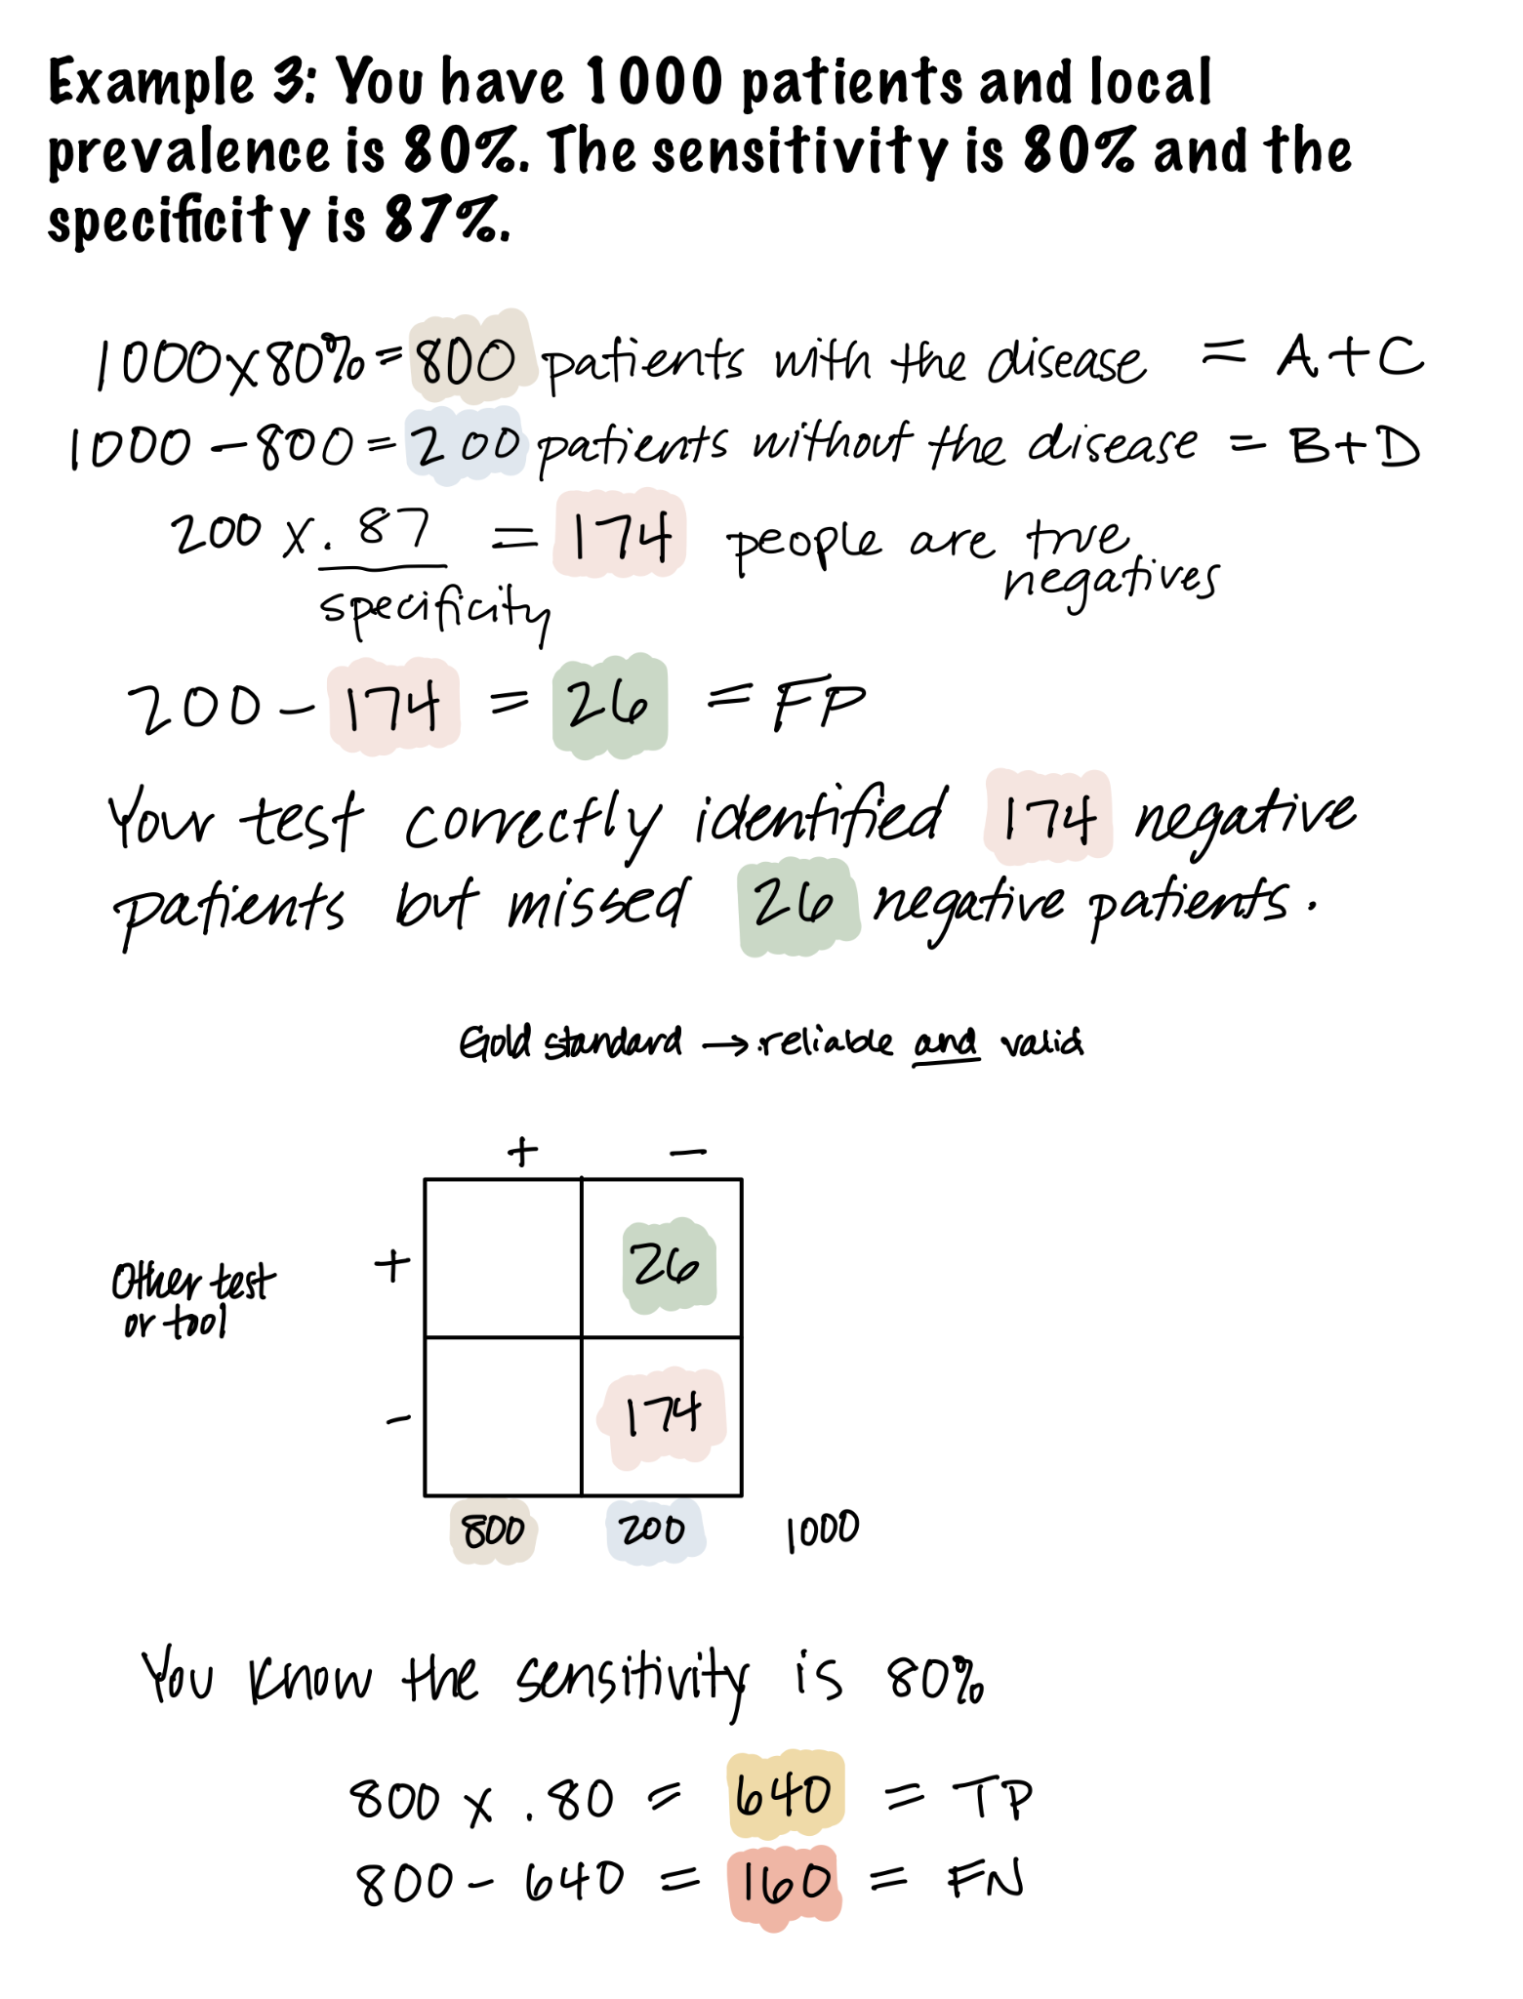 Example 3: You have 1000 patients and local prevalence is 80%. The sensitivity is 80% and the specificity is 87%. 1000*80% equals 800 patients with the disease (A+C). 1000-8000 equals 200 patients without the disease (B+C). 200*0.87 equals 174 people who are true negatives. 200-174 equals 26 FP. Your test correctly identified 174 negative patients but missed 26 negative patients. Two-by-two table with new test and gold standard. B is 26, D is 174, and you know A+C is 800 and B+D is 200. You know the sensitivity is 80%. To find true positives, take 800*0.80, which equals 640 TP. To find false negatives, take 800 minus 640, which equals 160 FN.